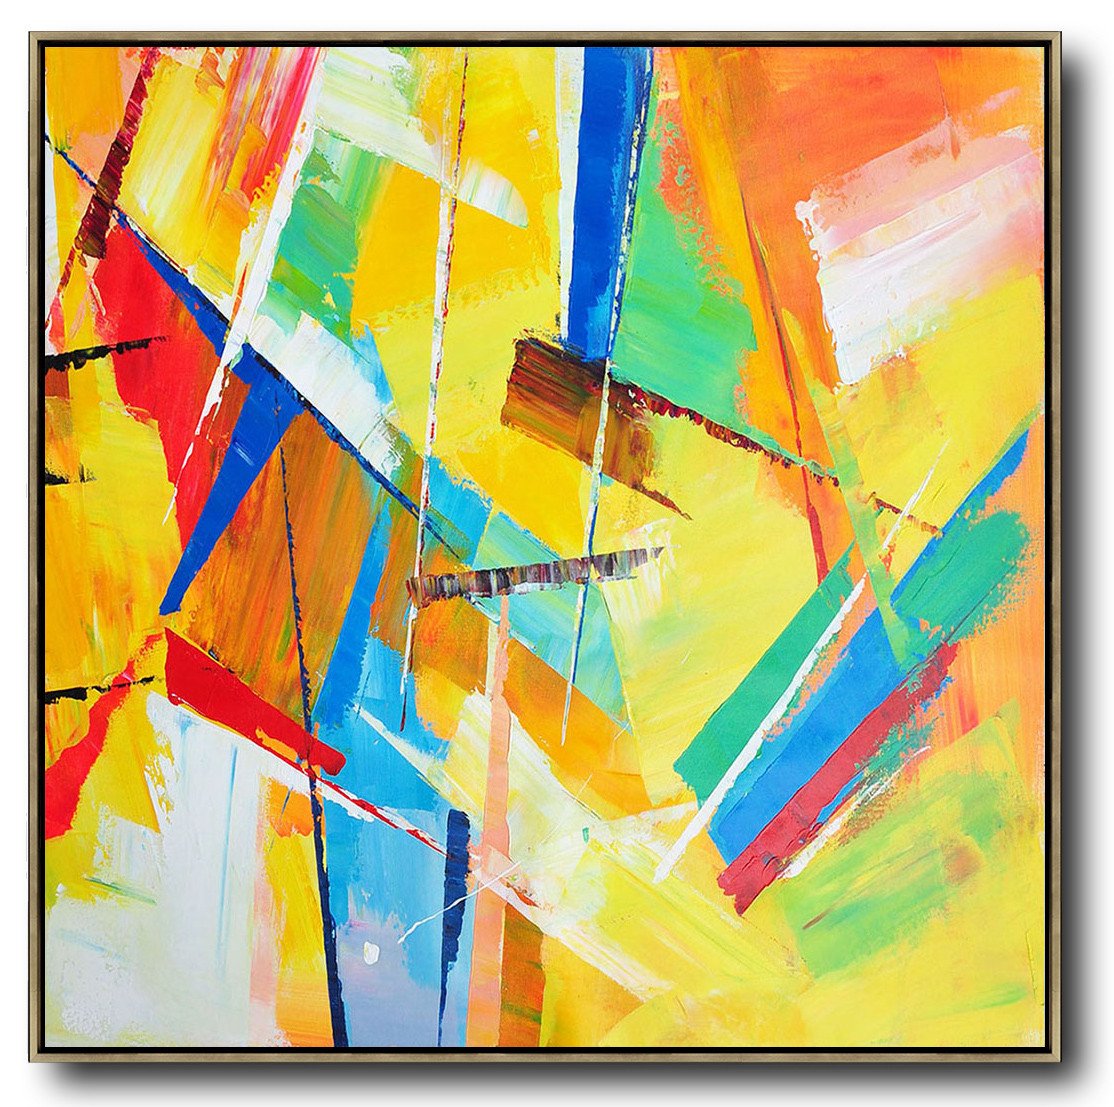 Abstract Painting Extra Large Canvas Art,Oversized Palette Knife Painting Contemporary Art On Canvas,Oversized Wall Decor,Yellow,Light Green,Red,Blue,Pink.etc